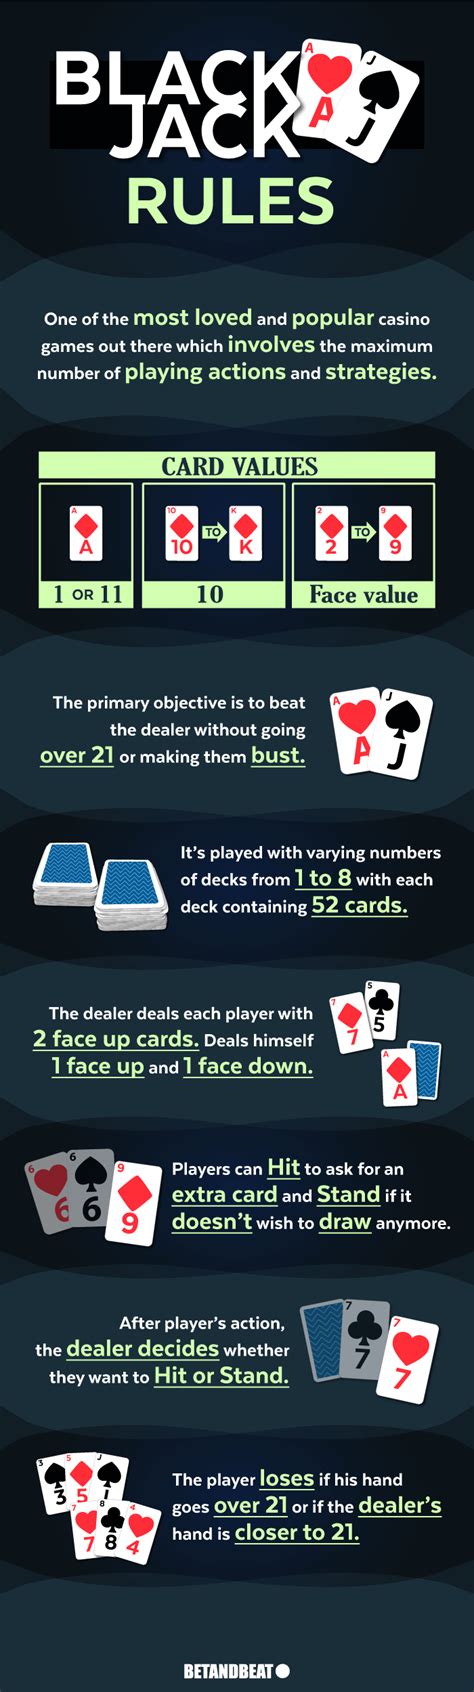 What is the golden rule of blackjack?